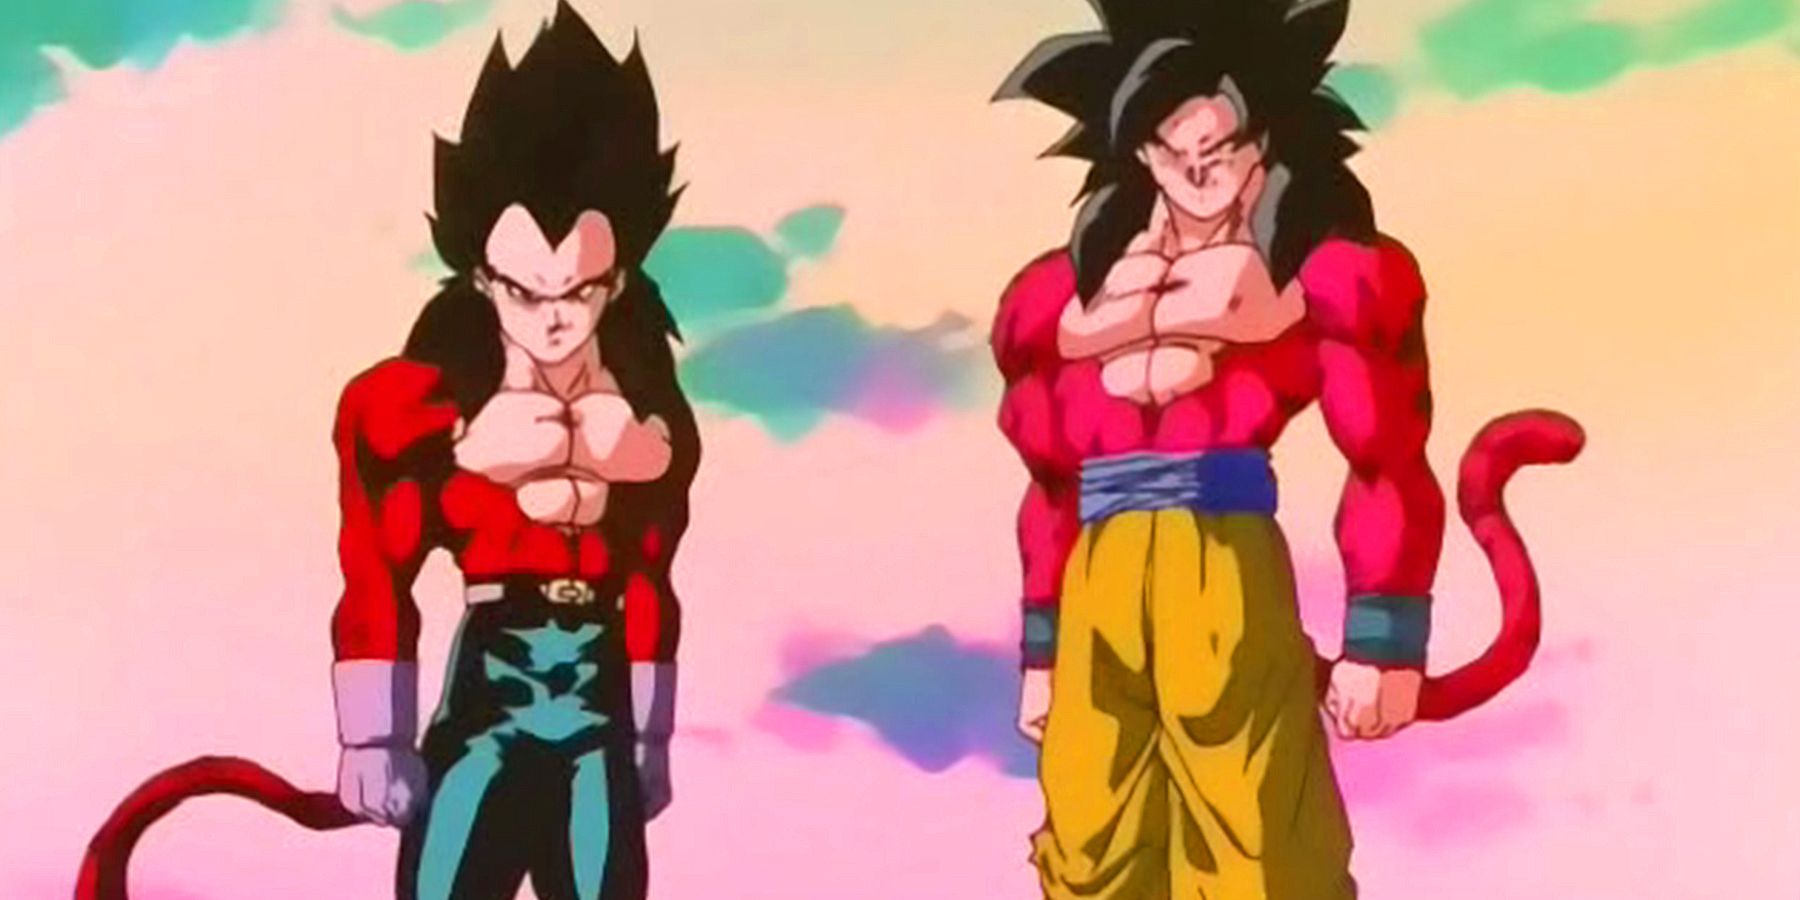 Why does Gogeta have red hair in his Super Saiyan 4 form whereas